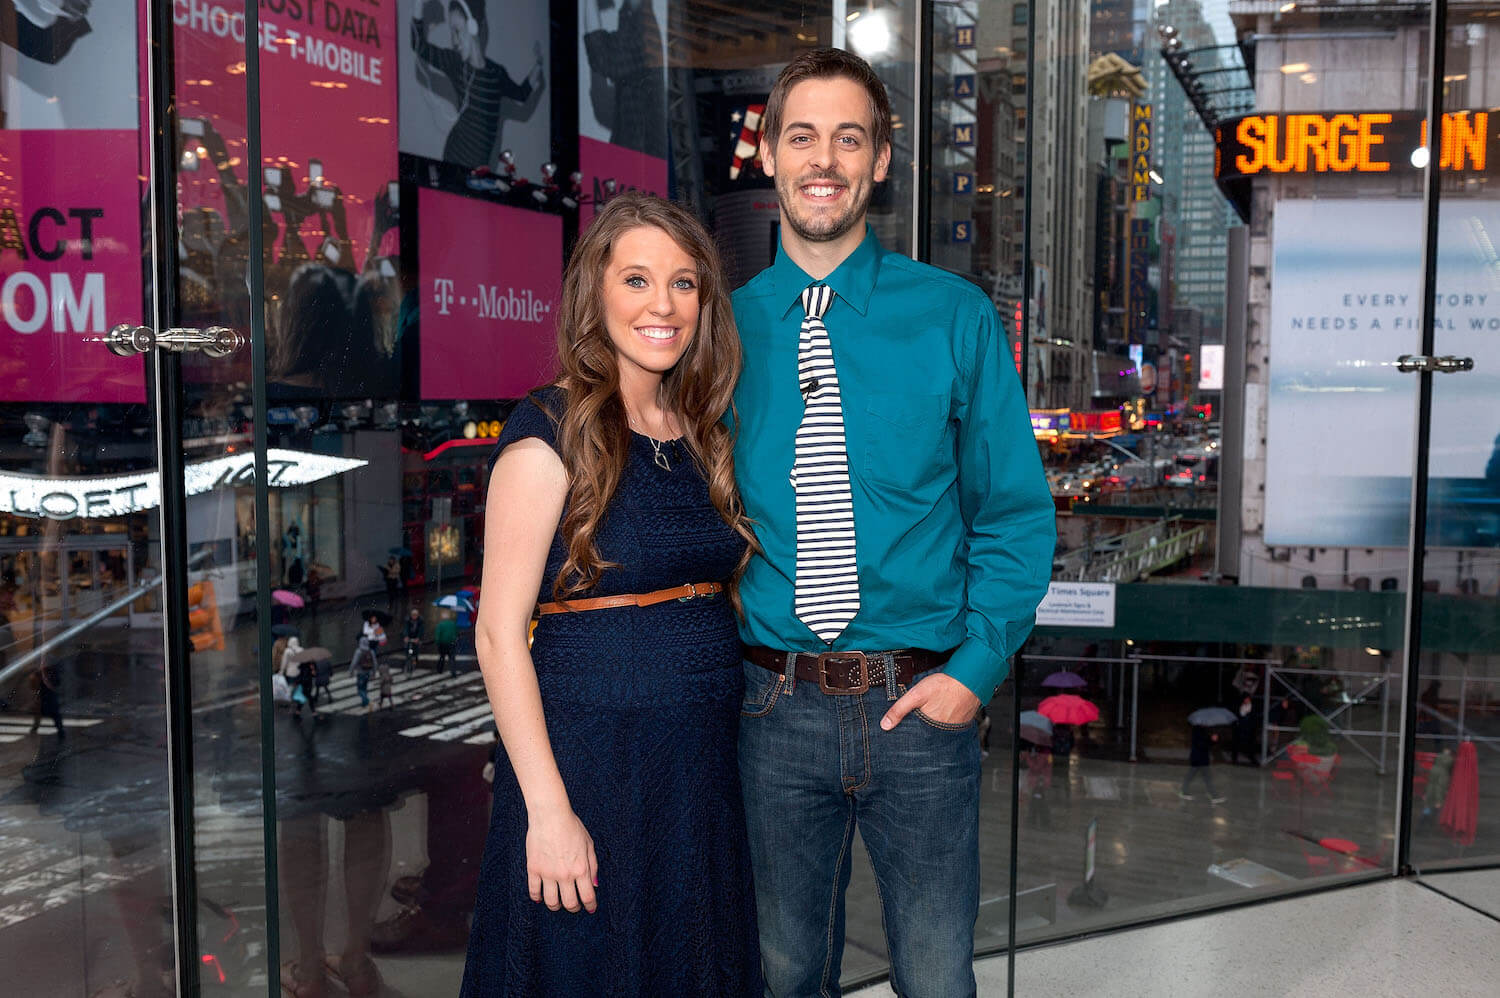 Jill Duggar and Derick Dillard of the Duggar family standing side by side and smiling